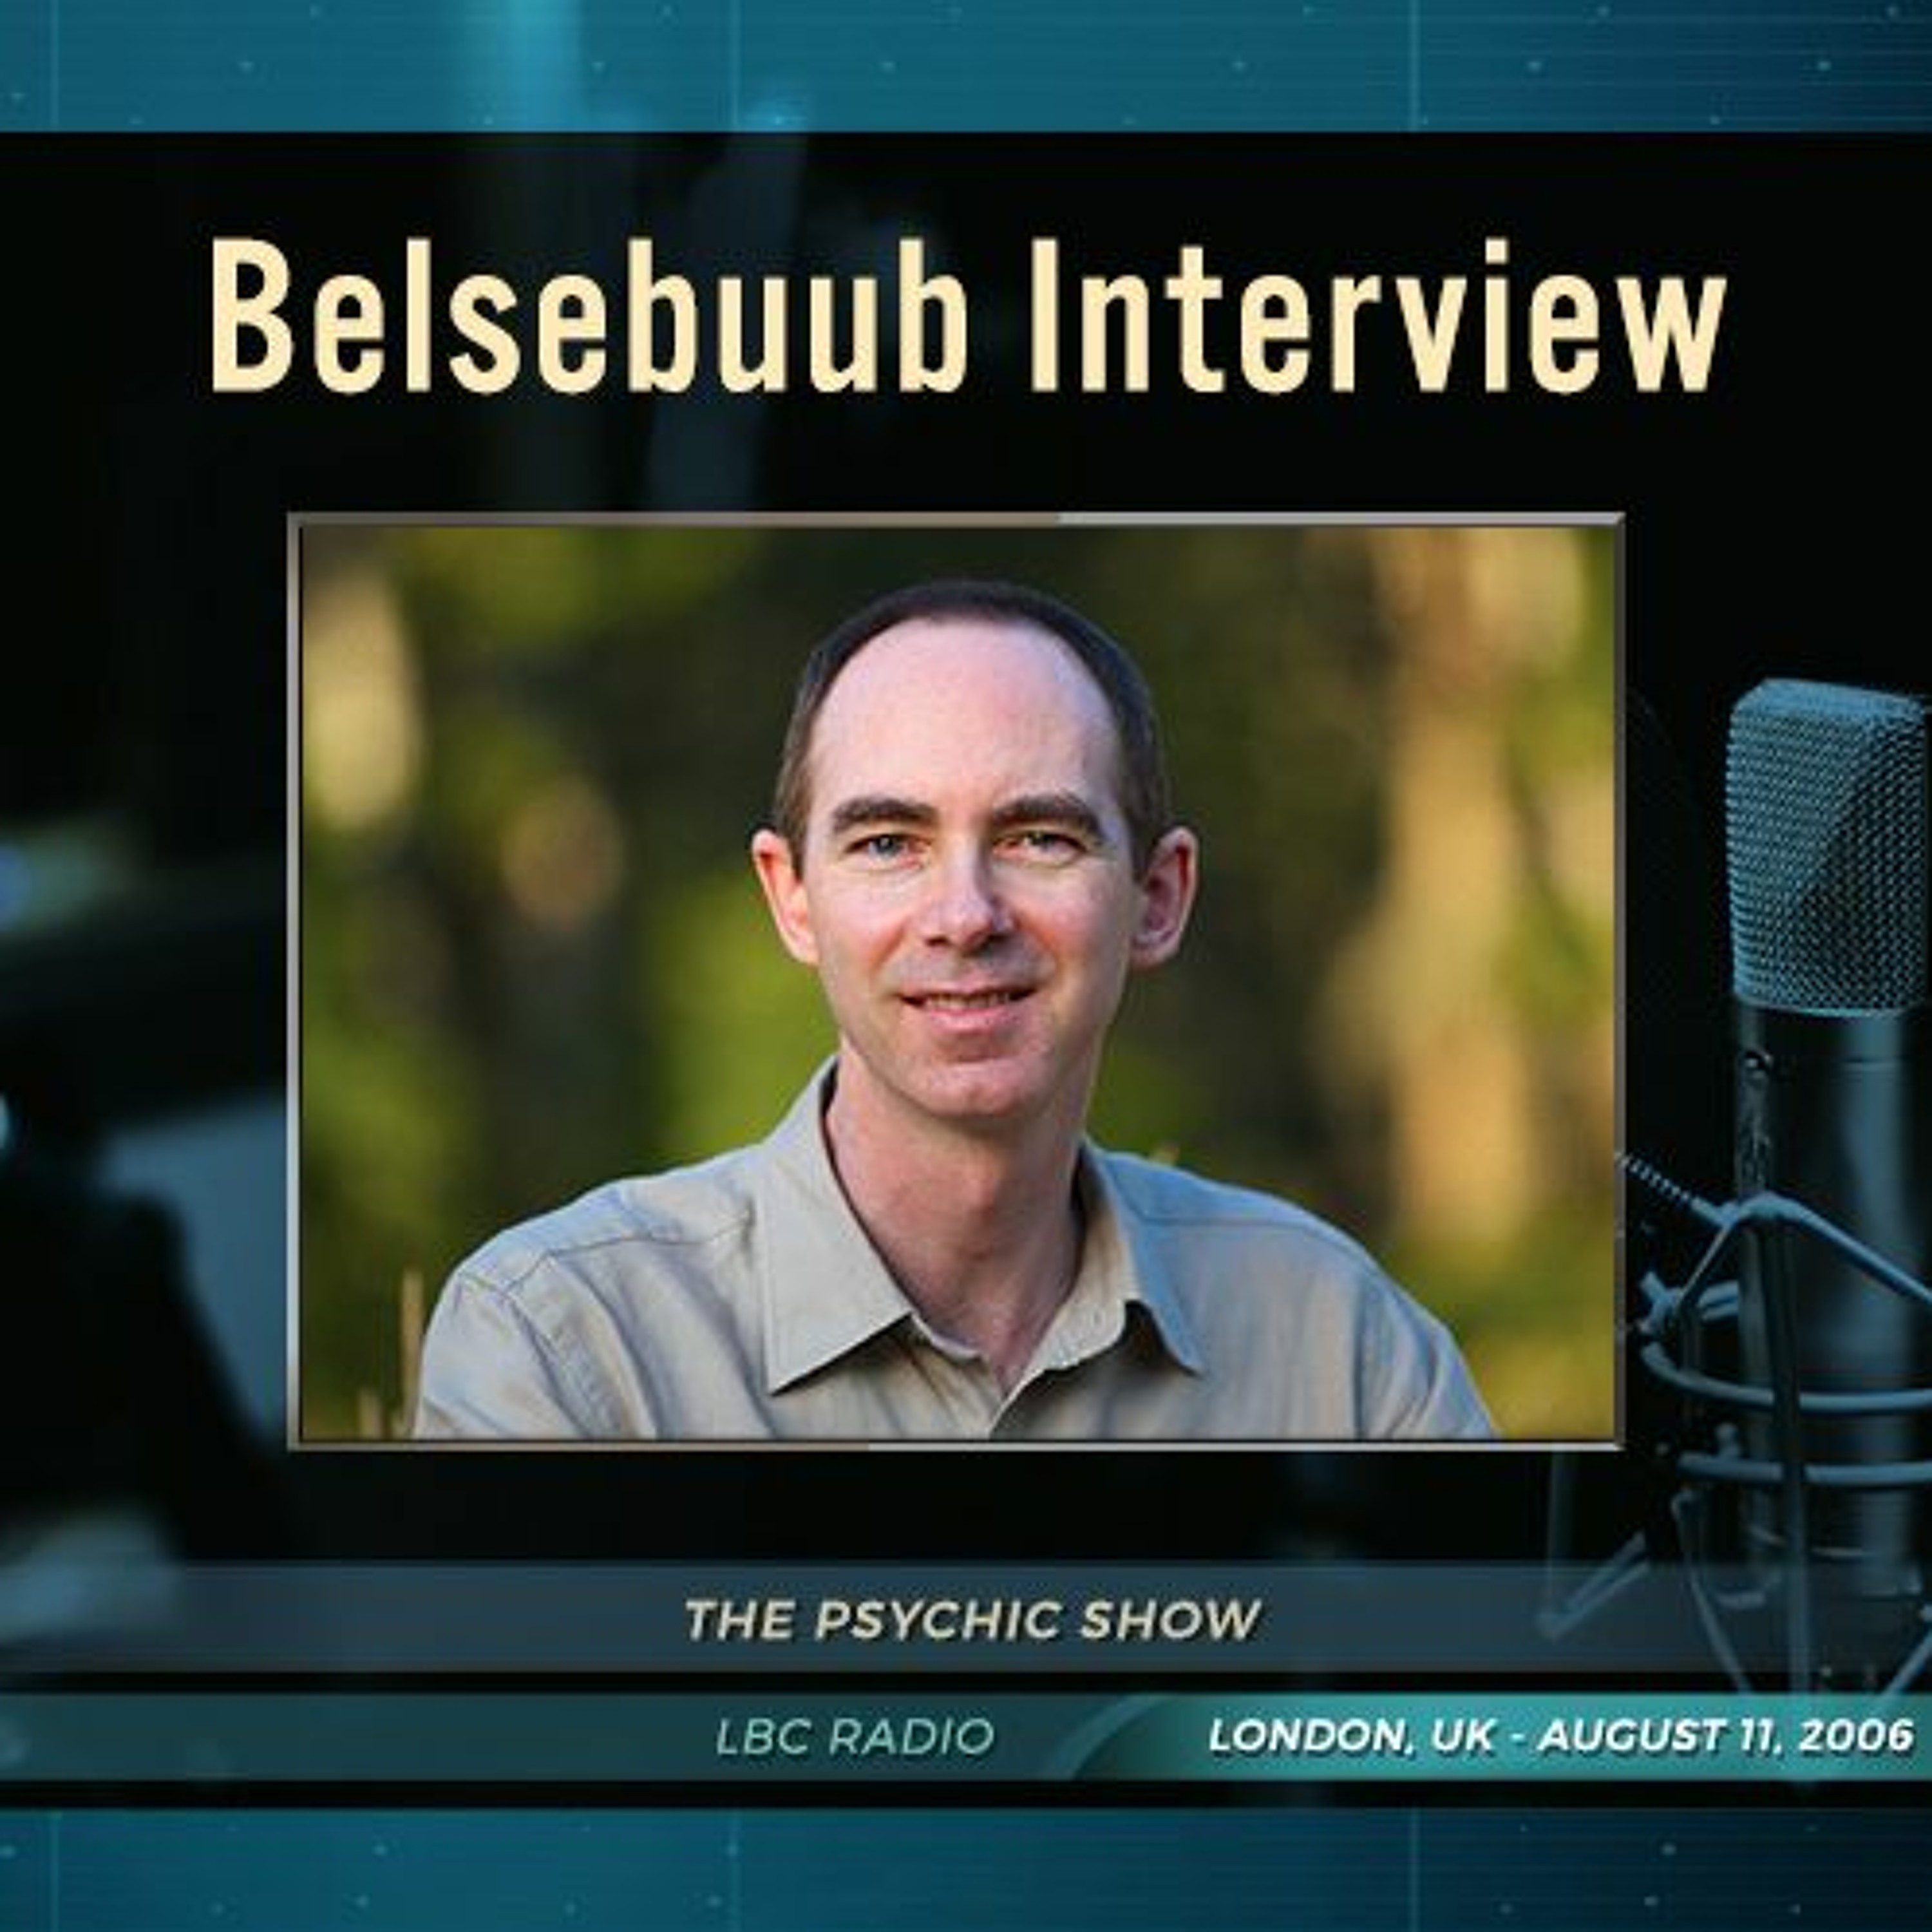 Belsebuub on ‘The Psychic Show’ LBC Radio: Astral Projection and Near-Death Experiences